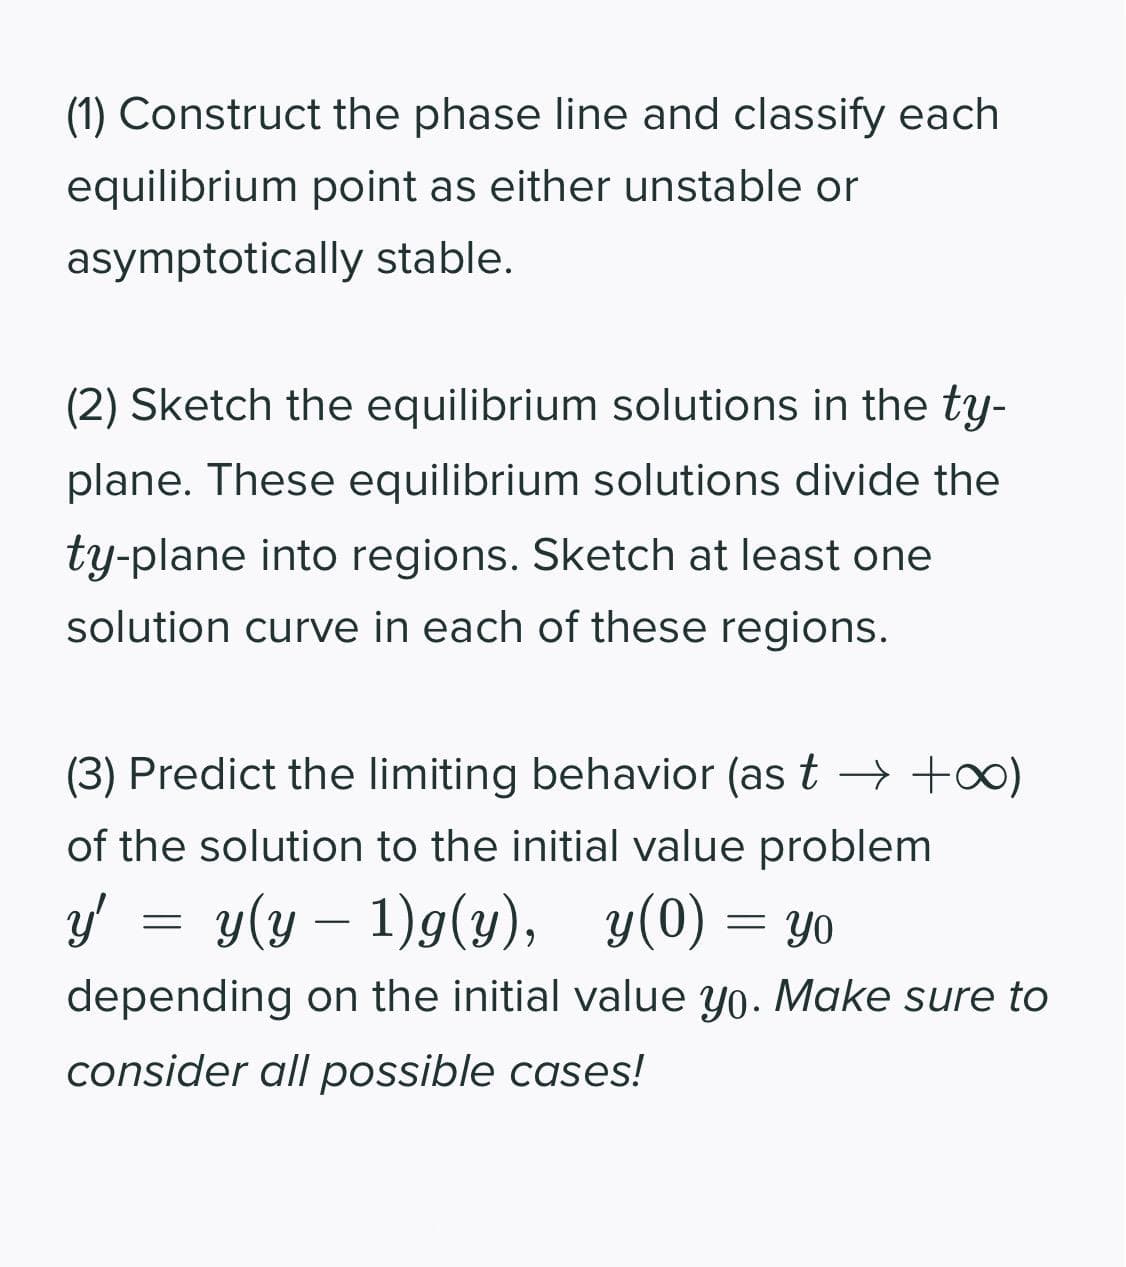 (1) Construct the phase line and classify each
equilibrium point as either unstable or
asymptotically stable.
(2) Sketch the equilibrium solutions in the ty-
plane. These equilibrium solutions divide the
ty-plane into regions. Sketch at least one
solution curve in each of these regions.
(3) Predict the limiting behavior (as t > +o)
of the solution to the initial value problem
y' = y(y – 1)g(y), y(0) = yo
= YO
depending on the initial value yo. Make sure to
consider all possible cases!
